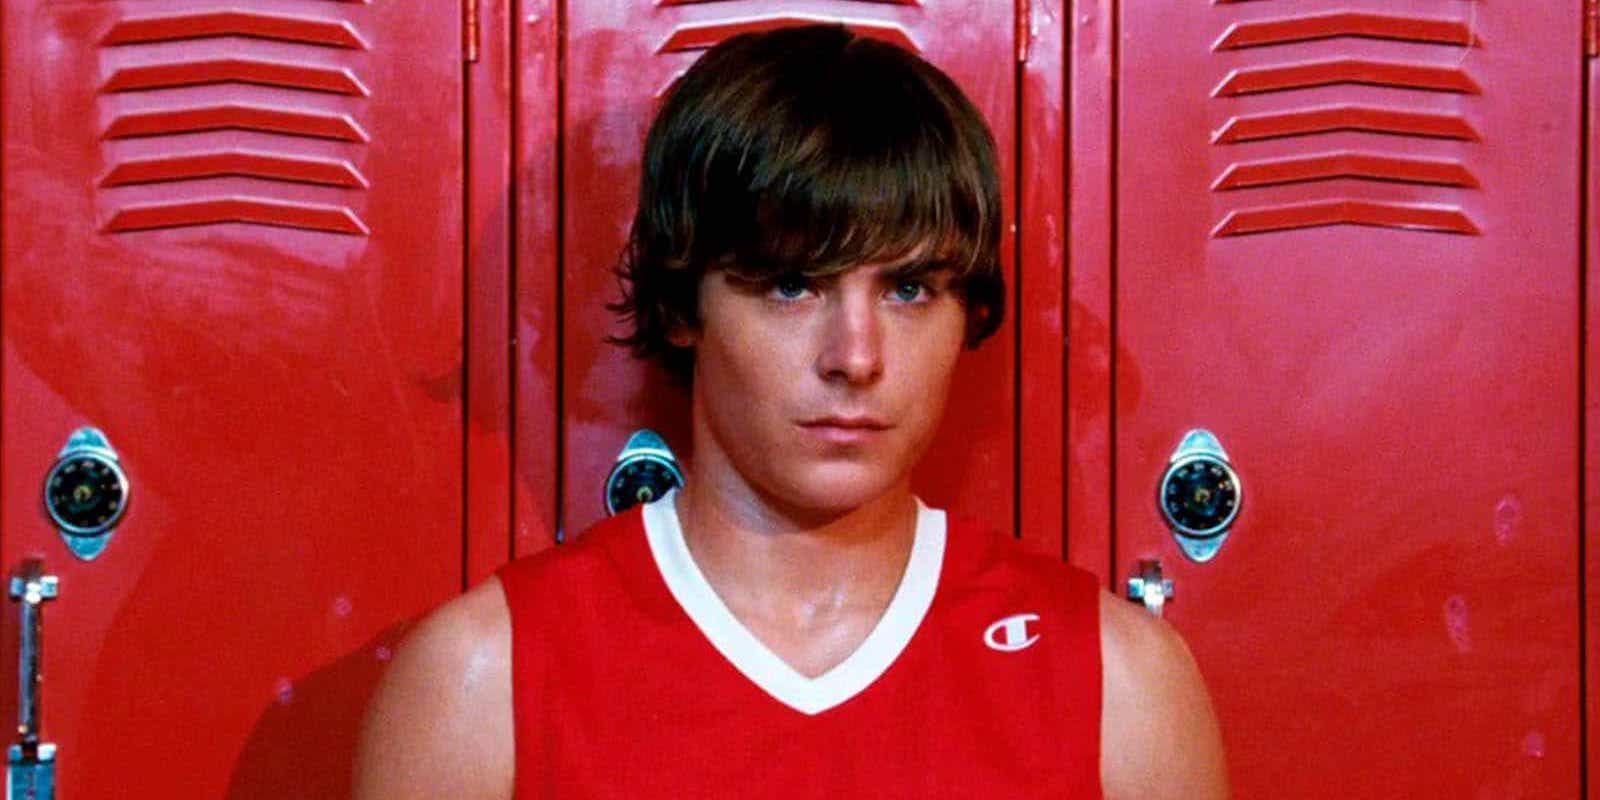 Zac Efron as Troy Bolton in High School Musical